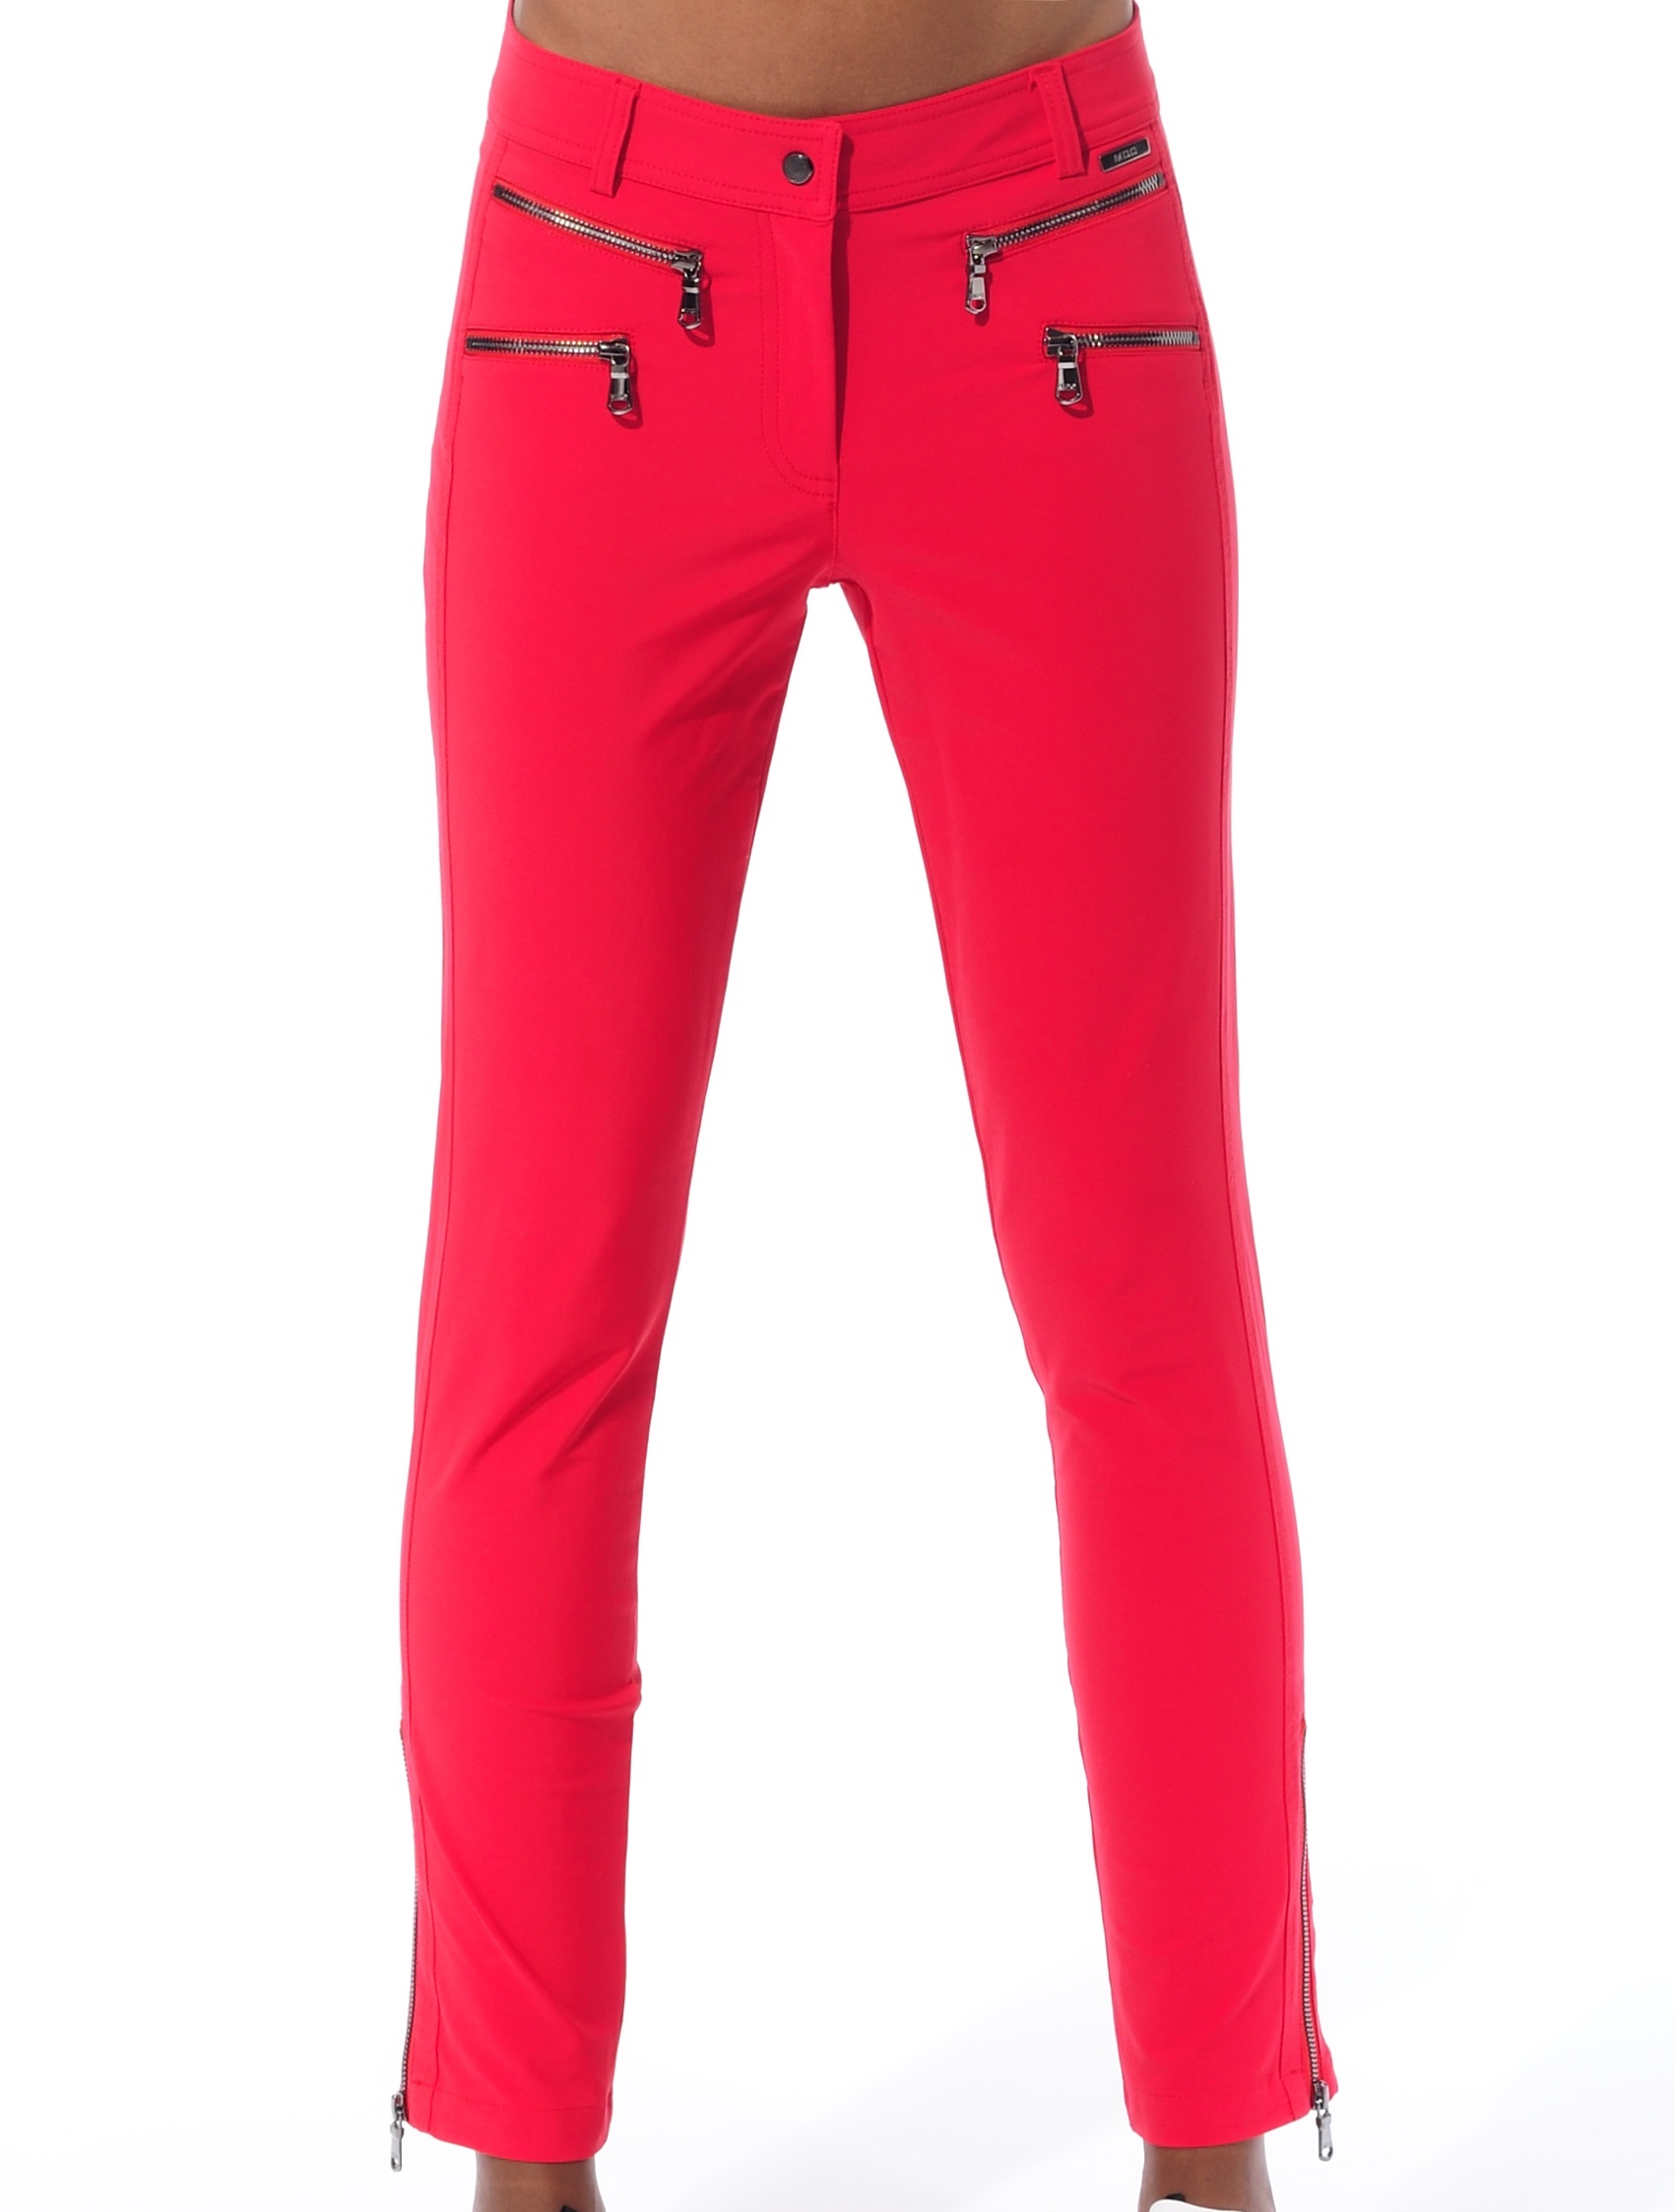 4way stretch double zip ankle pants red 